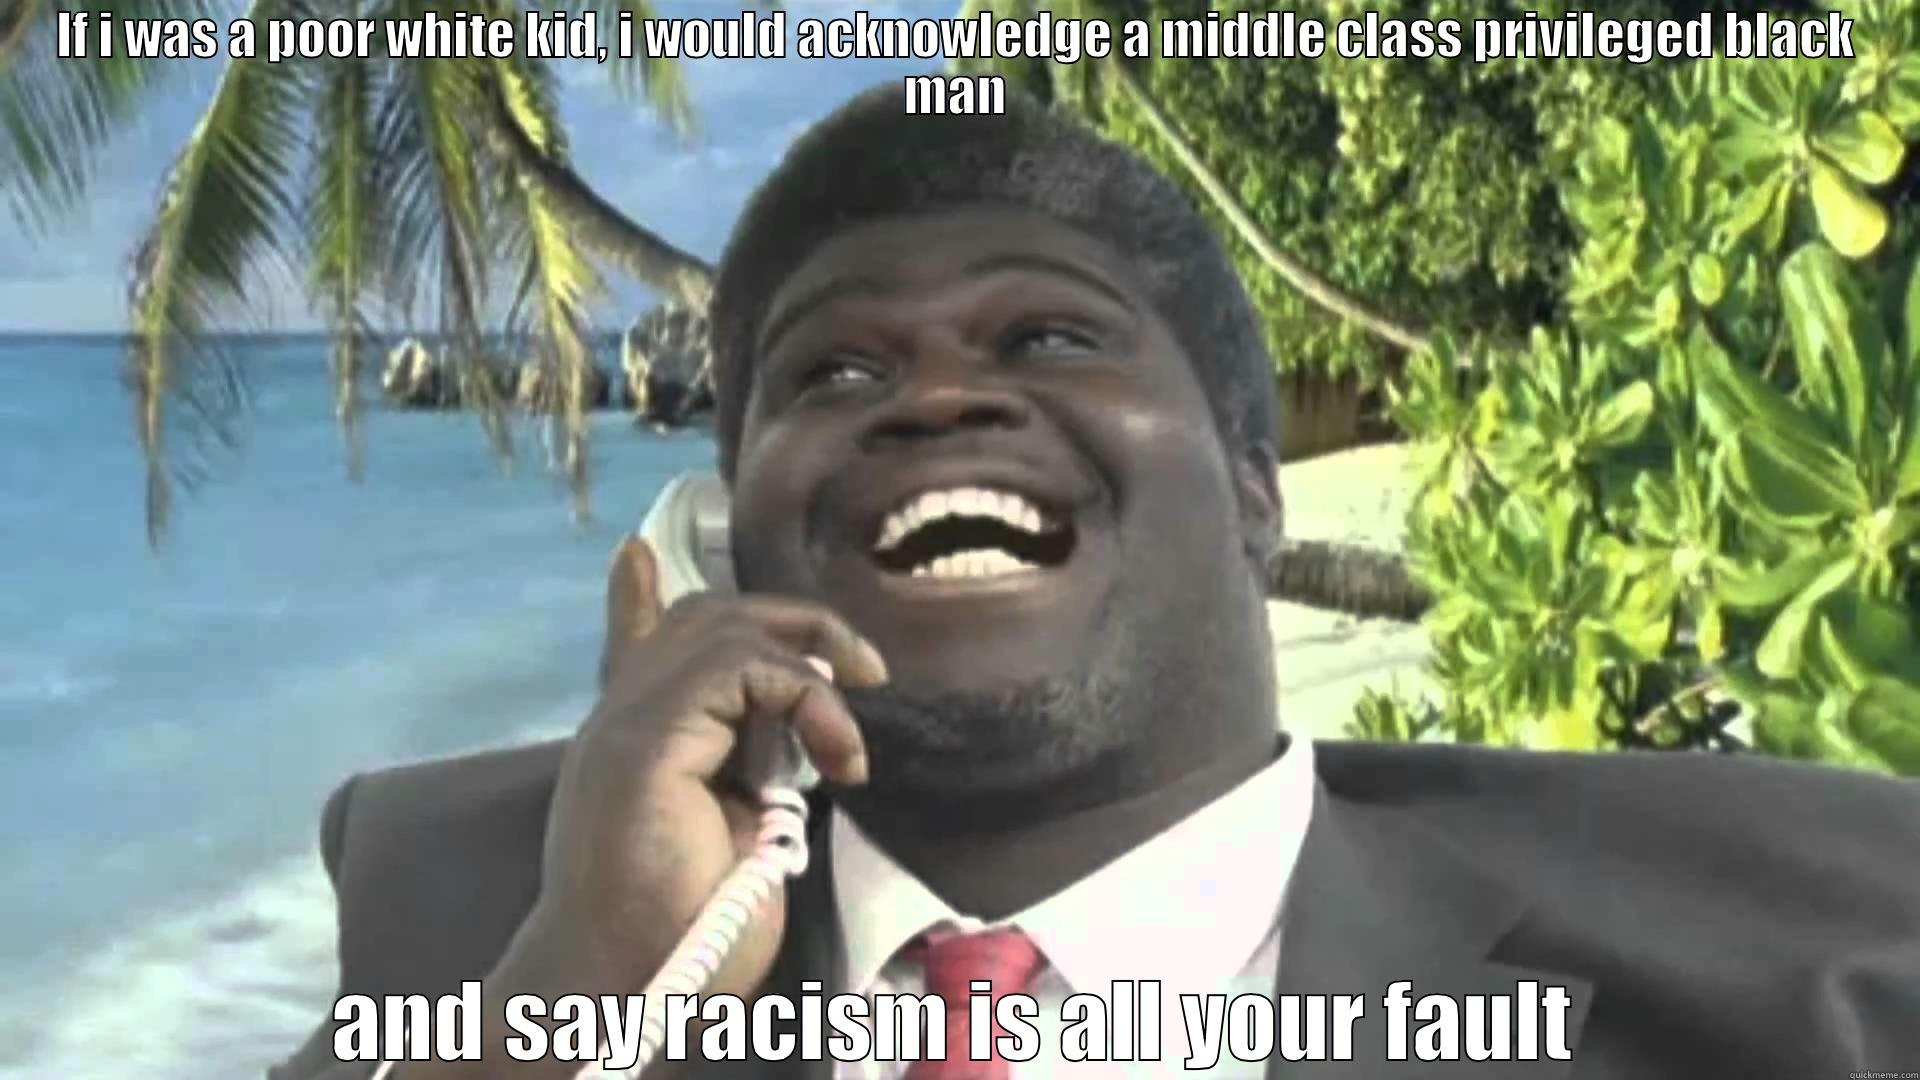 Privileged Black man - IF I WAS A POOR WHITE KID, I WOULD ACKNOWLEDGE A MIDDLE CLASS PRIVILEGED BLACK MAN AND SAY RACISM IS ALL YOUR FAULT Misc